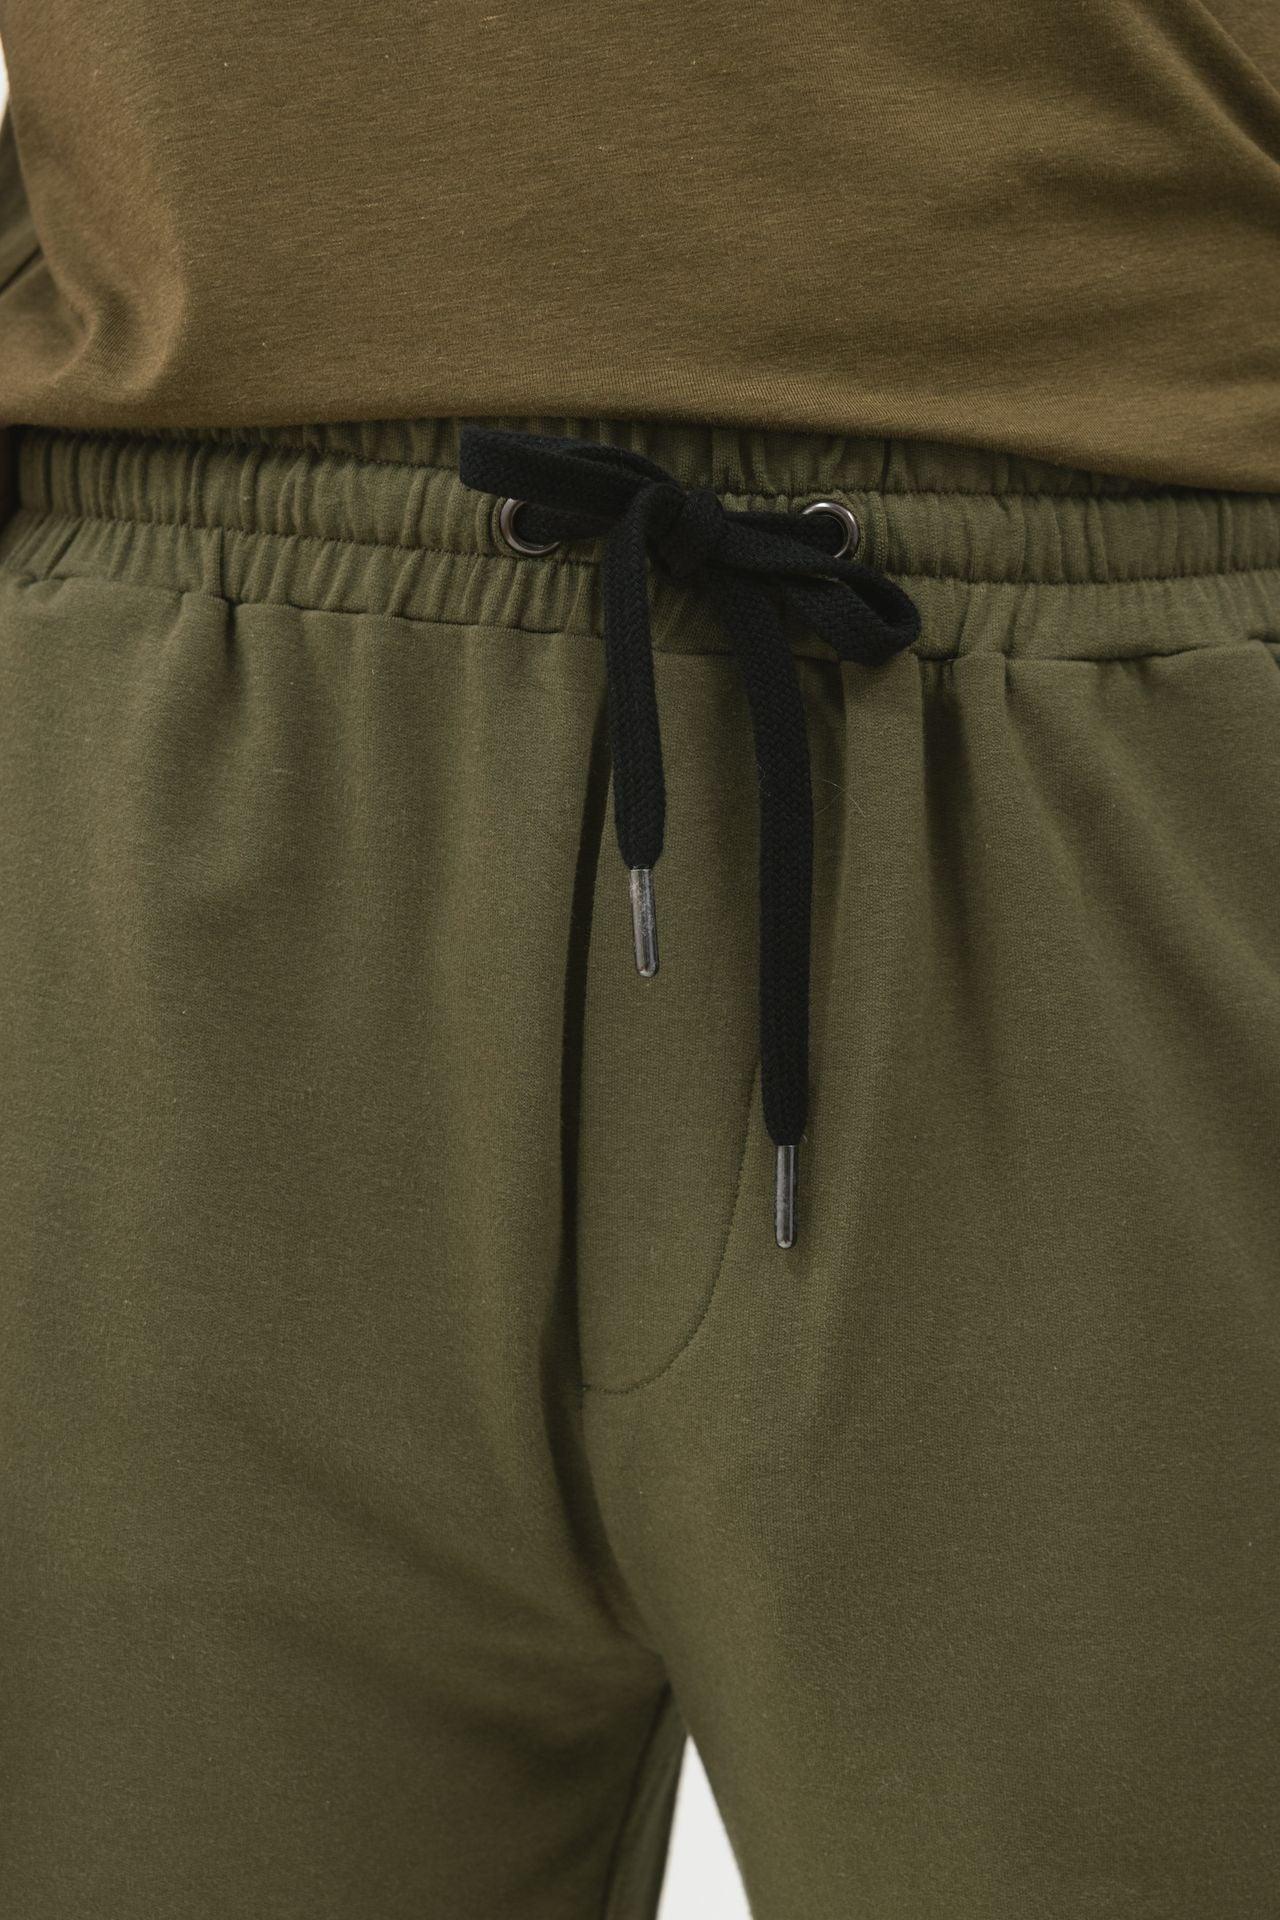 Side Lined Shorts - NOT LABELED